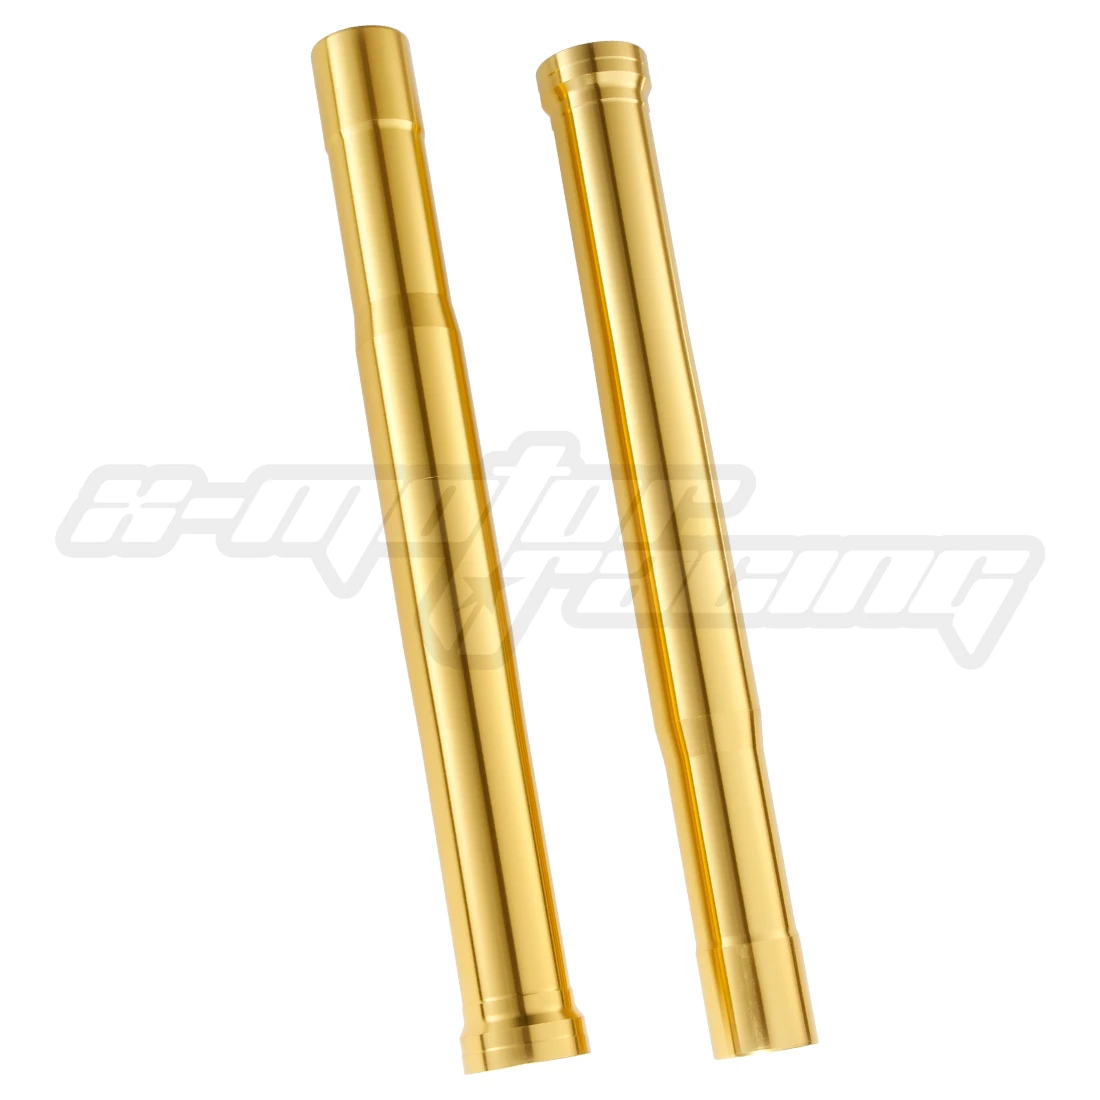 

Motorcycle Accessories Front Fork Outer Tube Pipe For Suzuki GSR750 2011-2016 51130-08J00-000 500mm Gold Aluminum